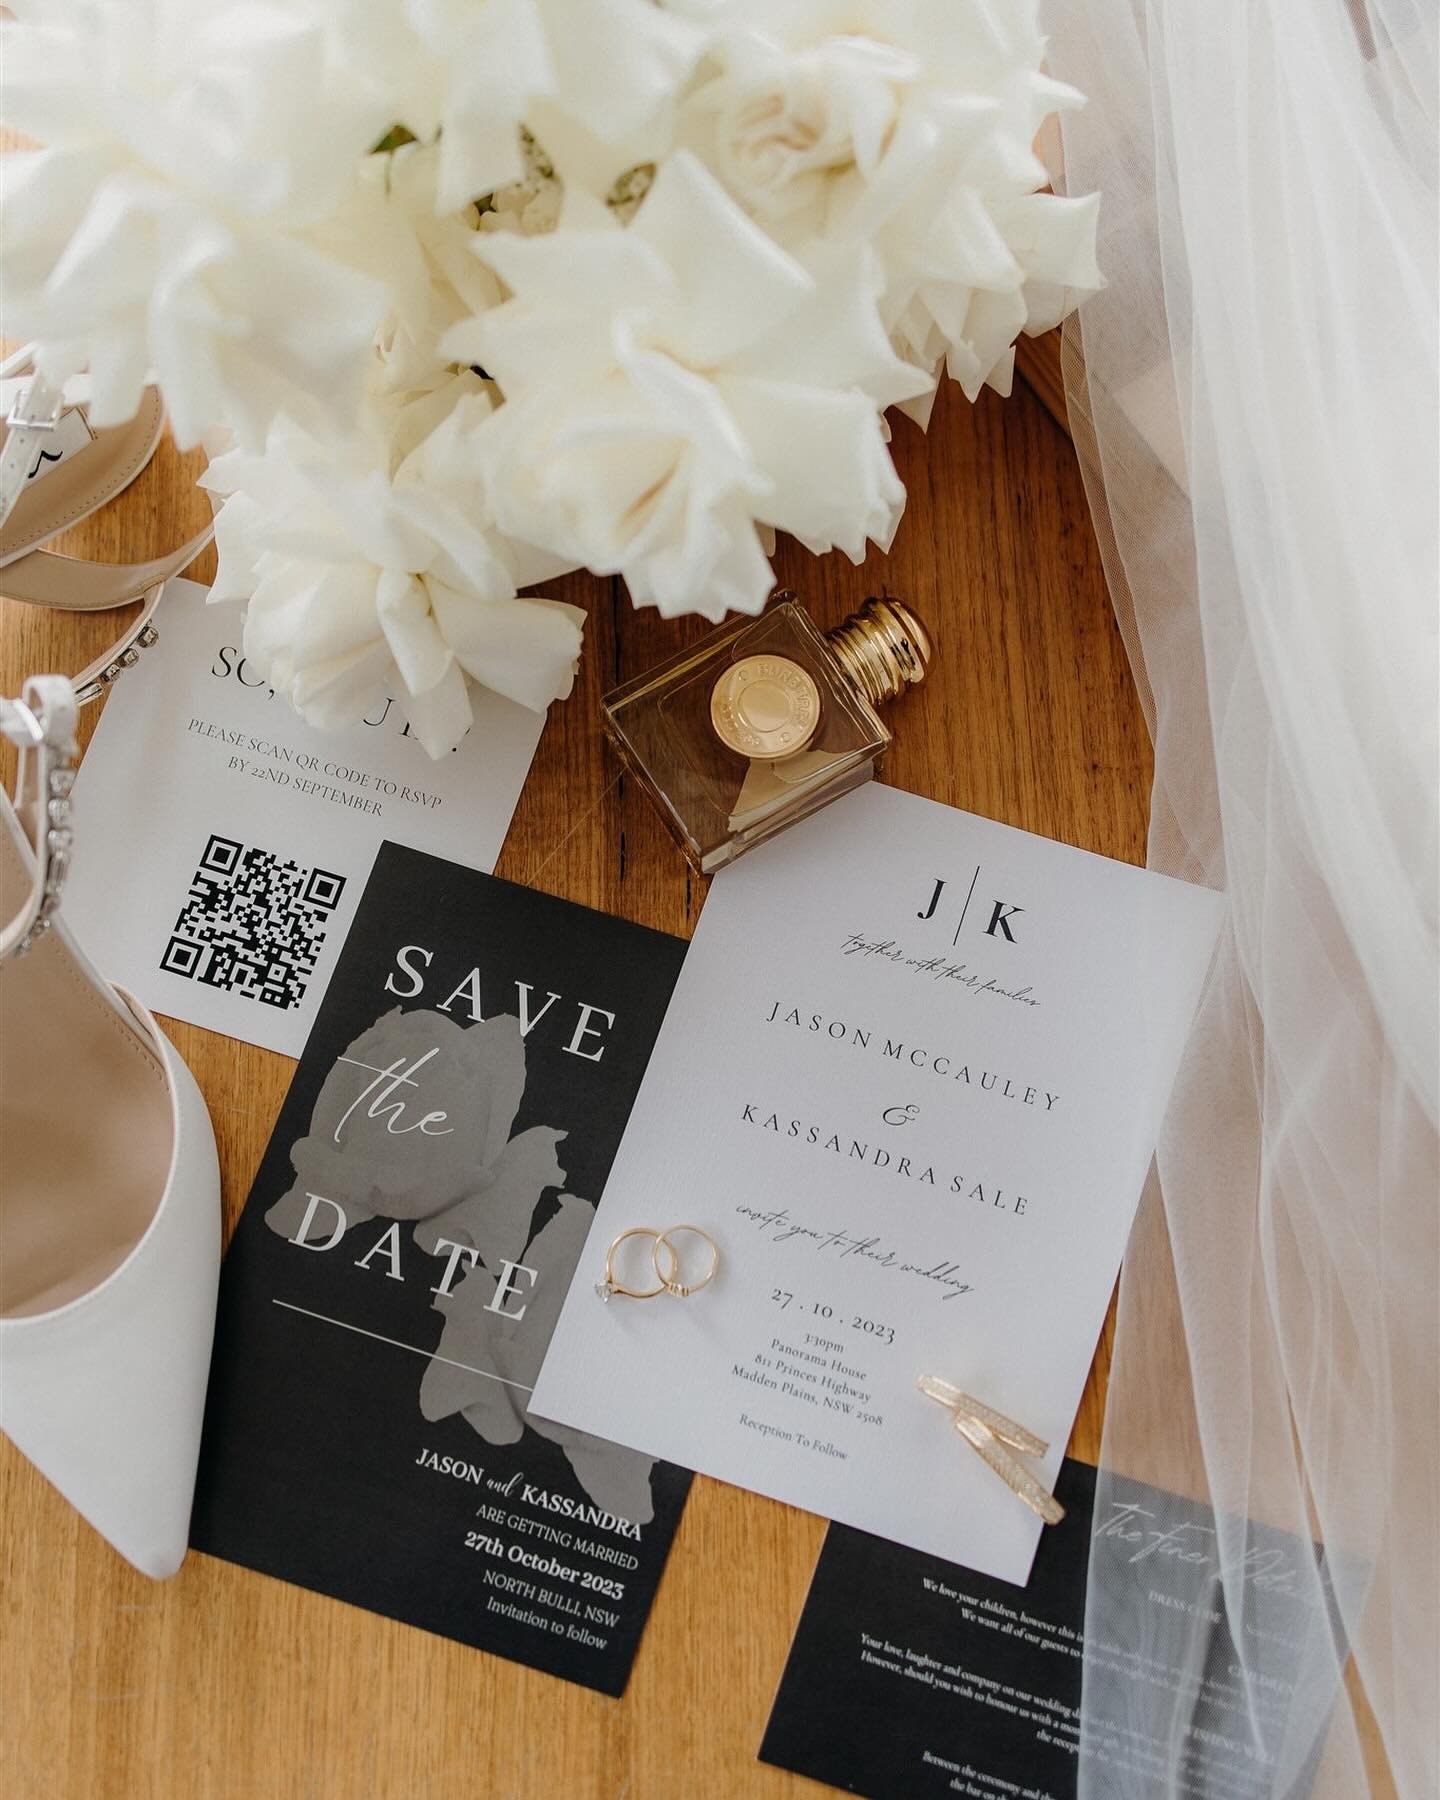 Couple of details from K + J.
The little things that we don&rsquo;t forget to capture. All the small bits and pieces of your big day that makes it special. 

#wedding #weddingday #weddingphotography #weddinginspiration #weddingdetails #weddingdetail 